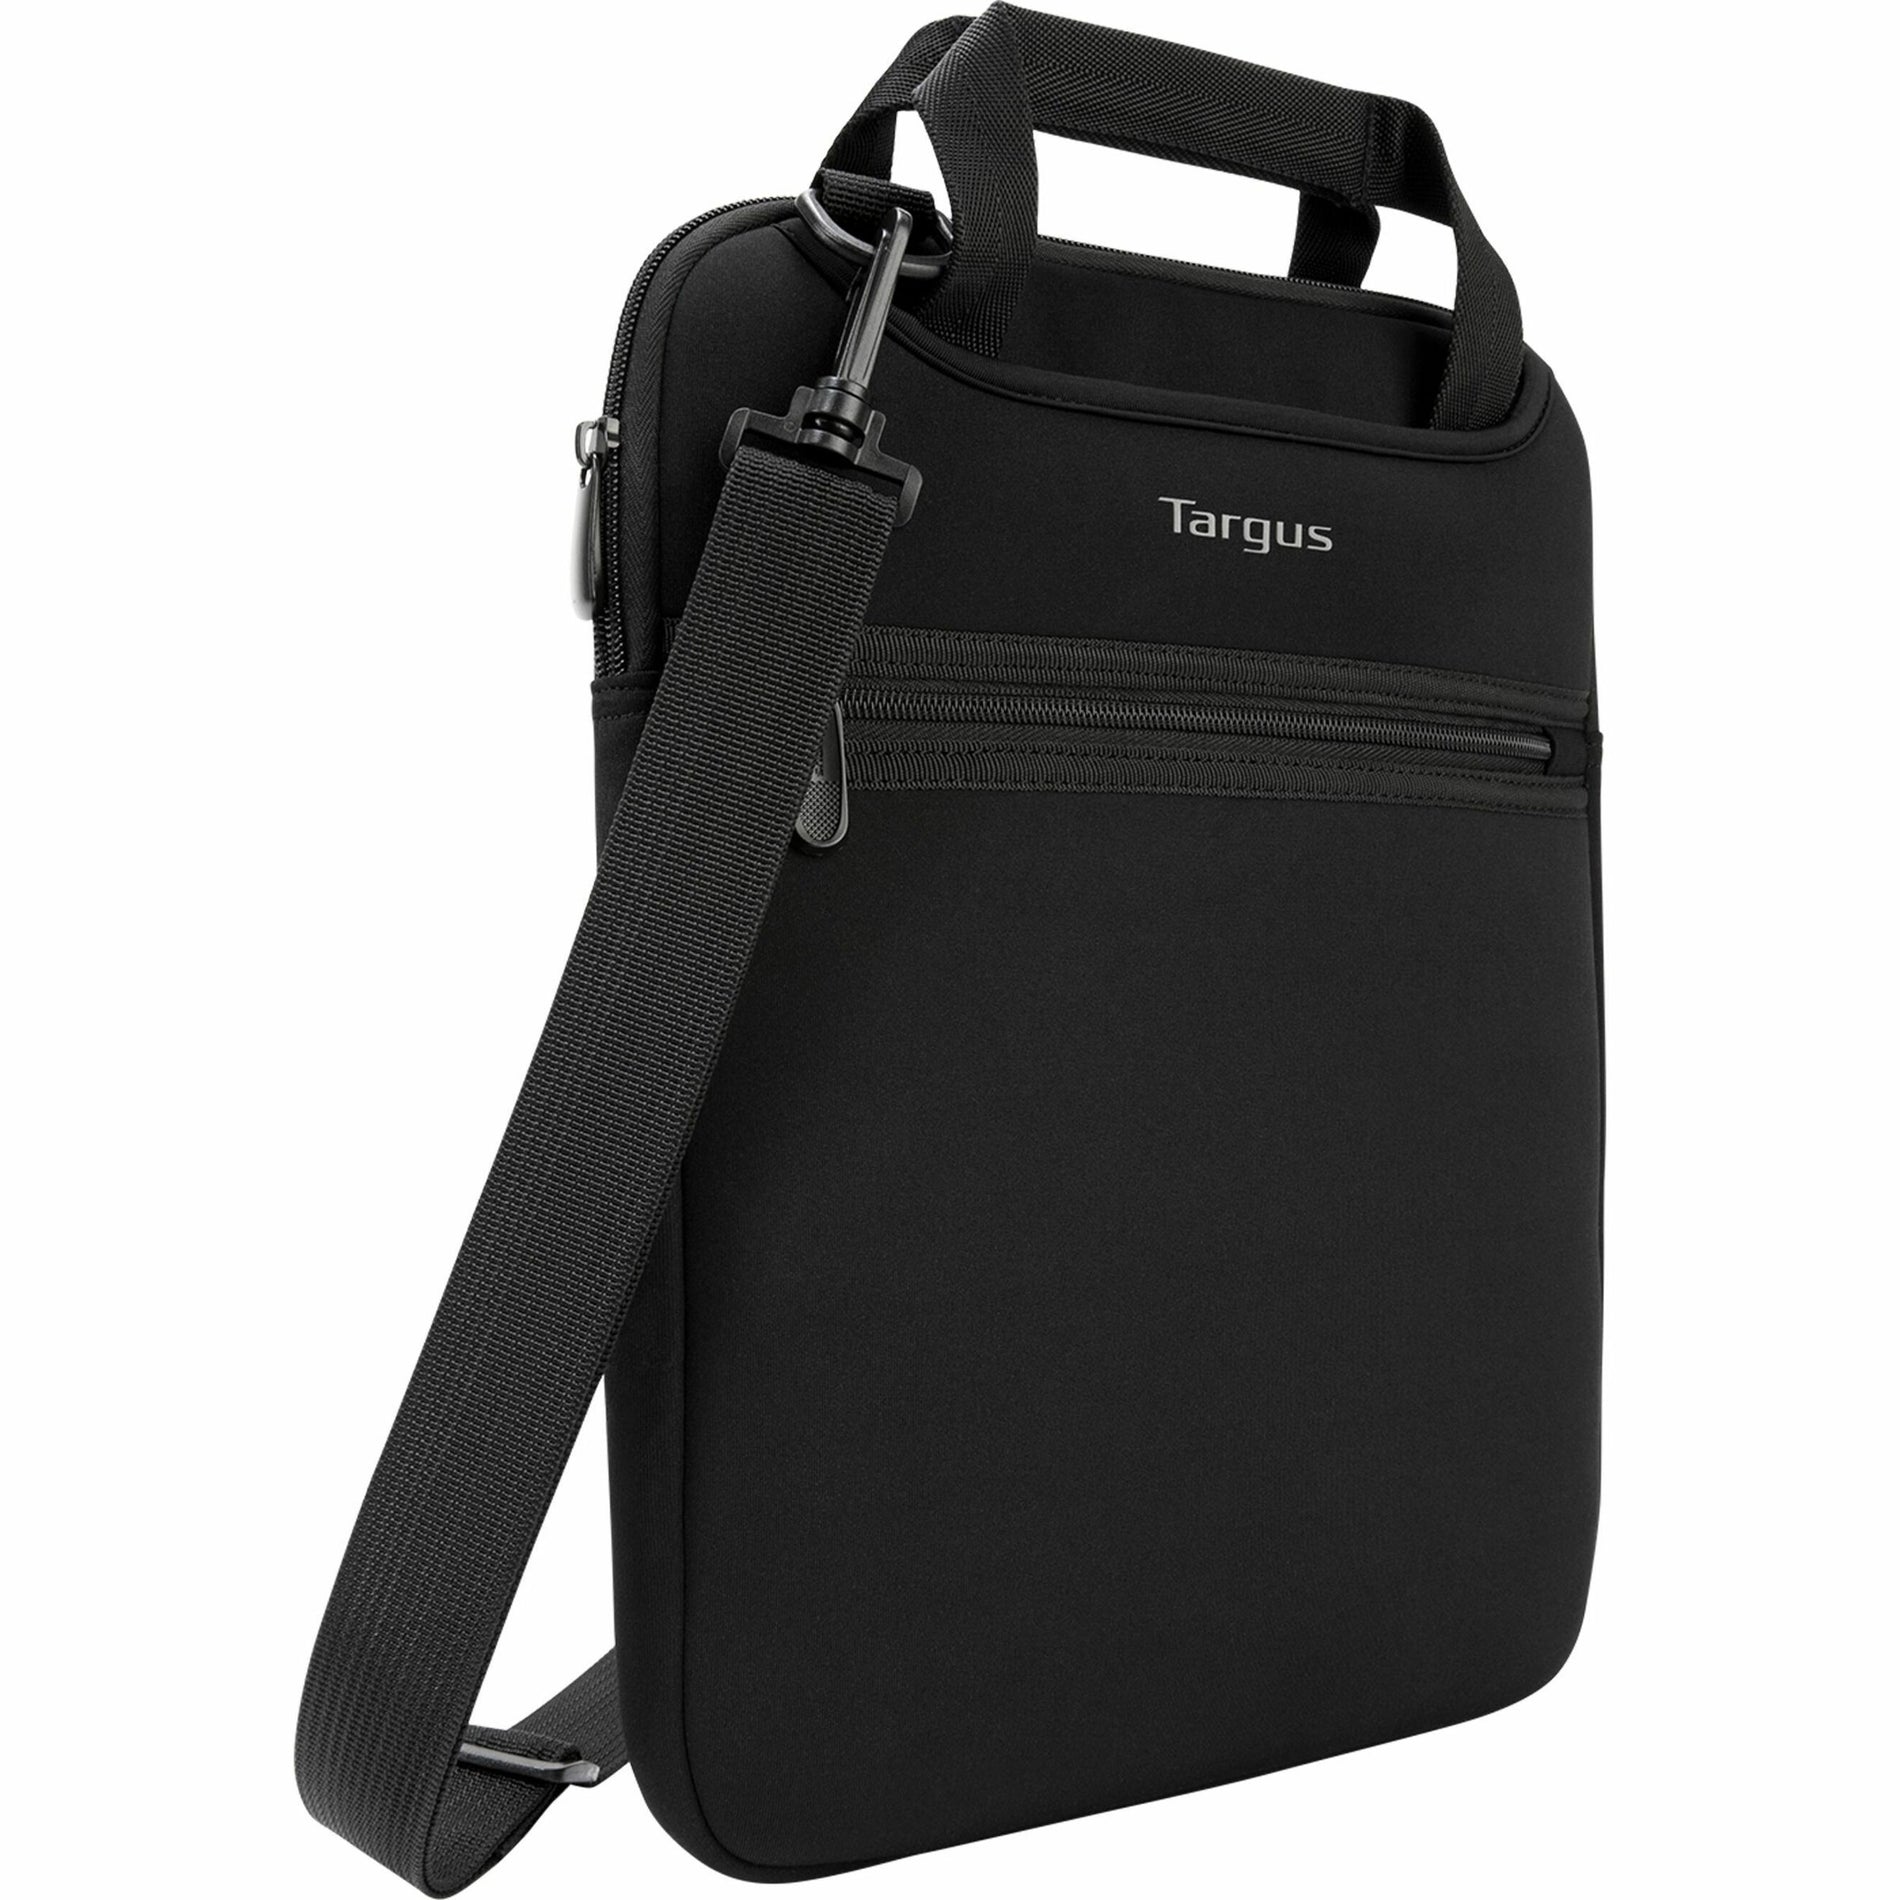 Targus TSS912 Slipcase for 12" Notebook, Black, with Hideaway Handles